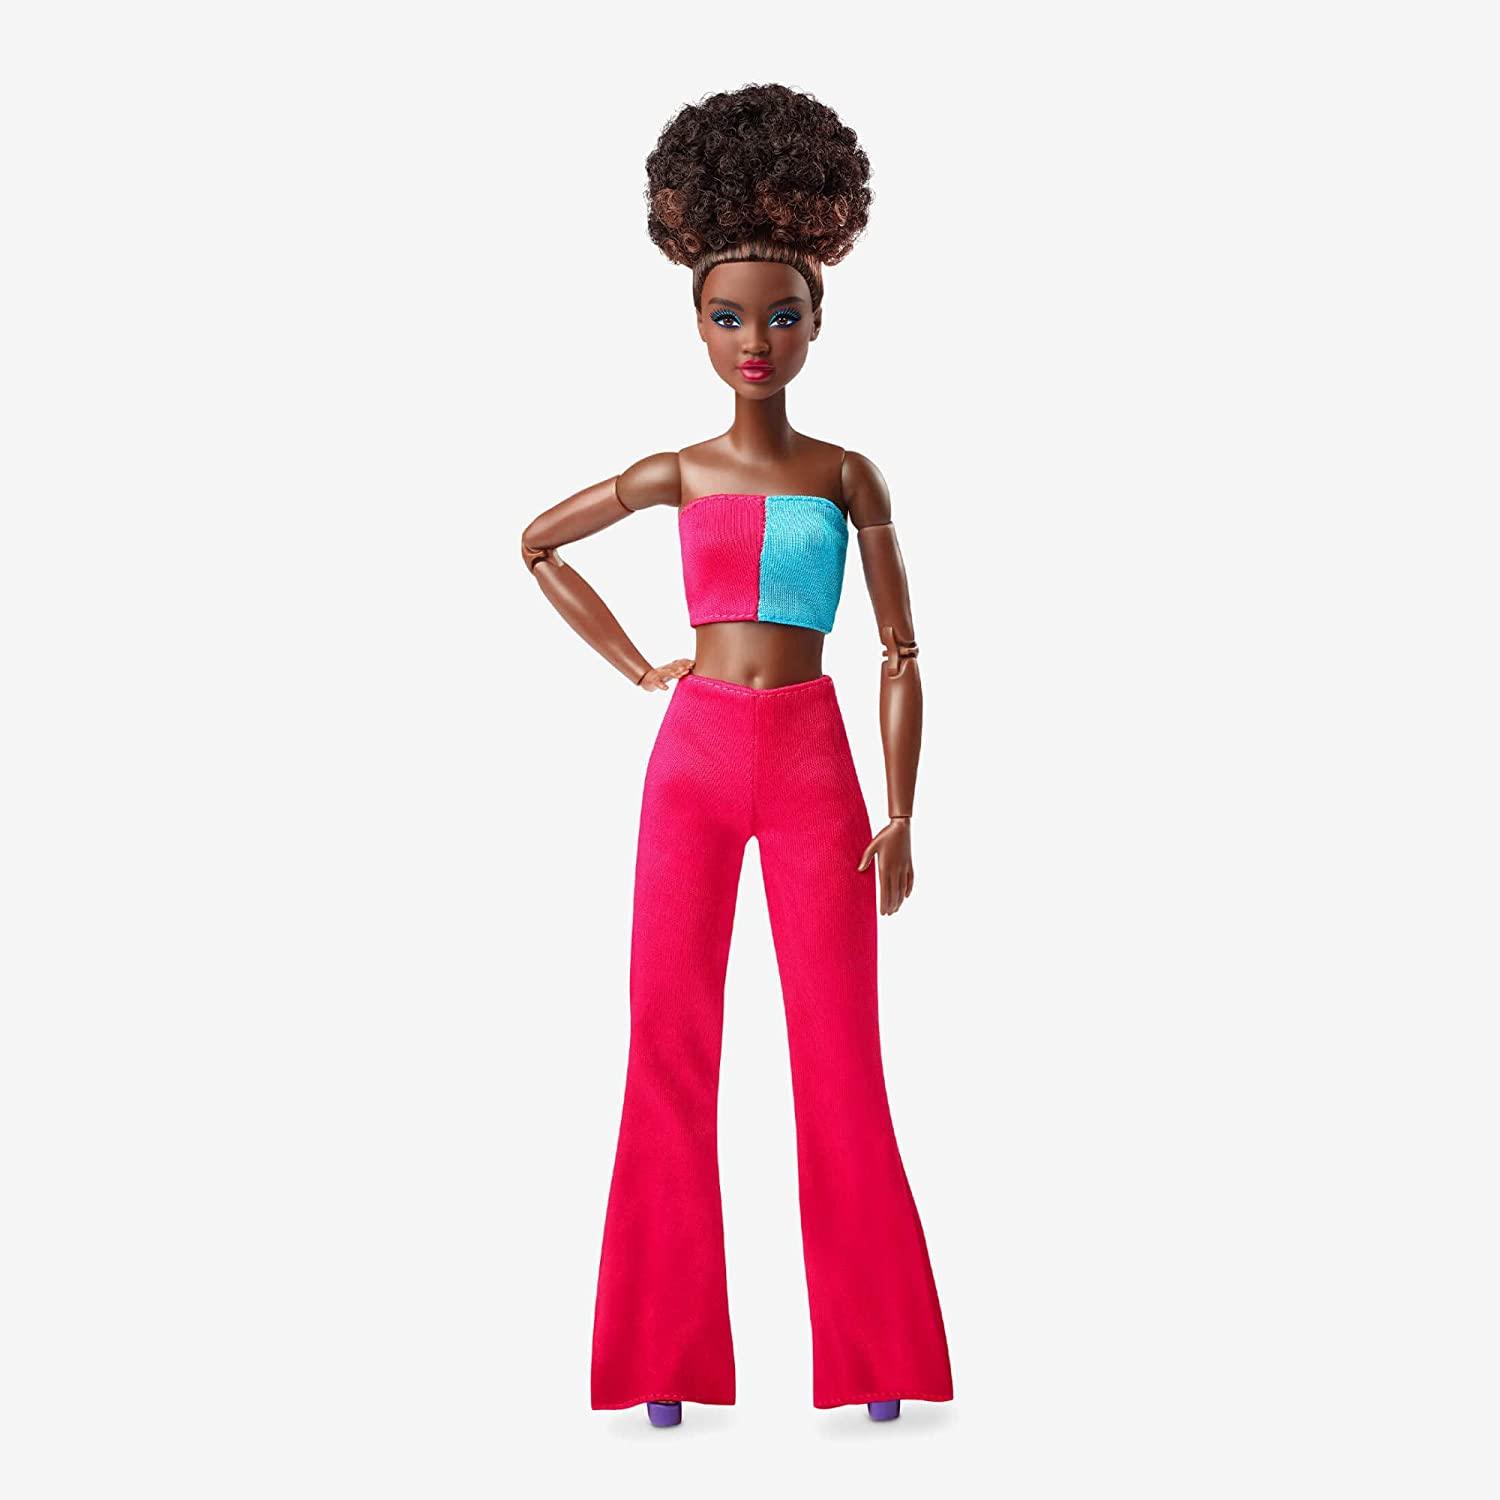 Barbie Looks Doll, Natural Black Hair, Color Block Outfit, Crop Top and Flare Pants, Style and Pose, Fashion Collectibles - BumbleToys - 5-7 Years, Barbie, Barbie Looks, Fashion Dolls & Accessories, Girls, Pre-Order